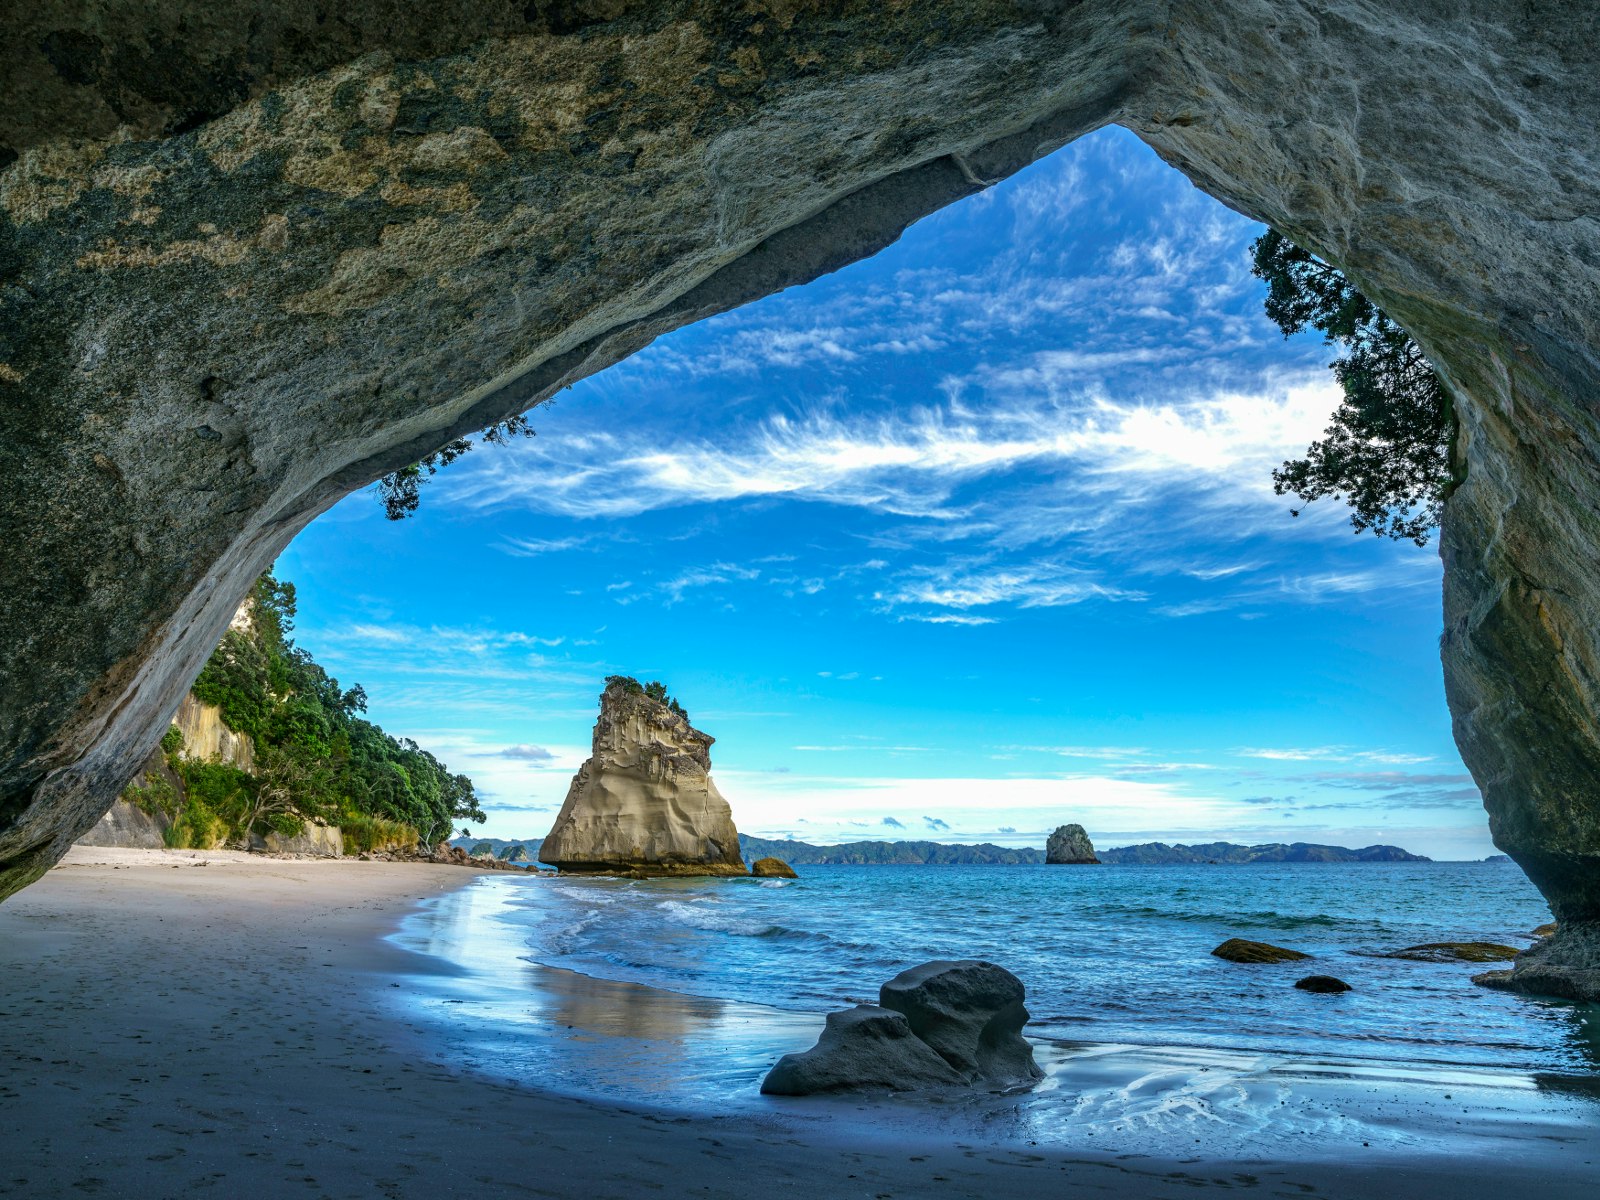 The shot is taken through a rock arch over Cathedral Cove beach, with a large freestanding rock formation at the end of the sweeping beach